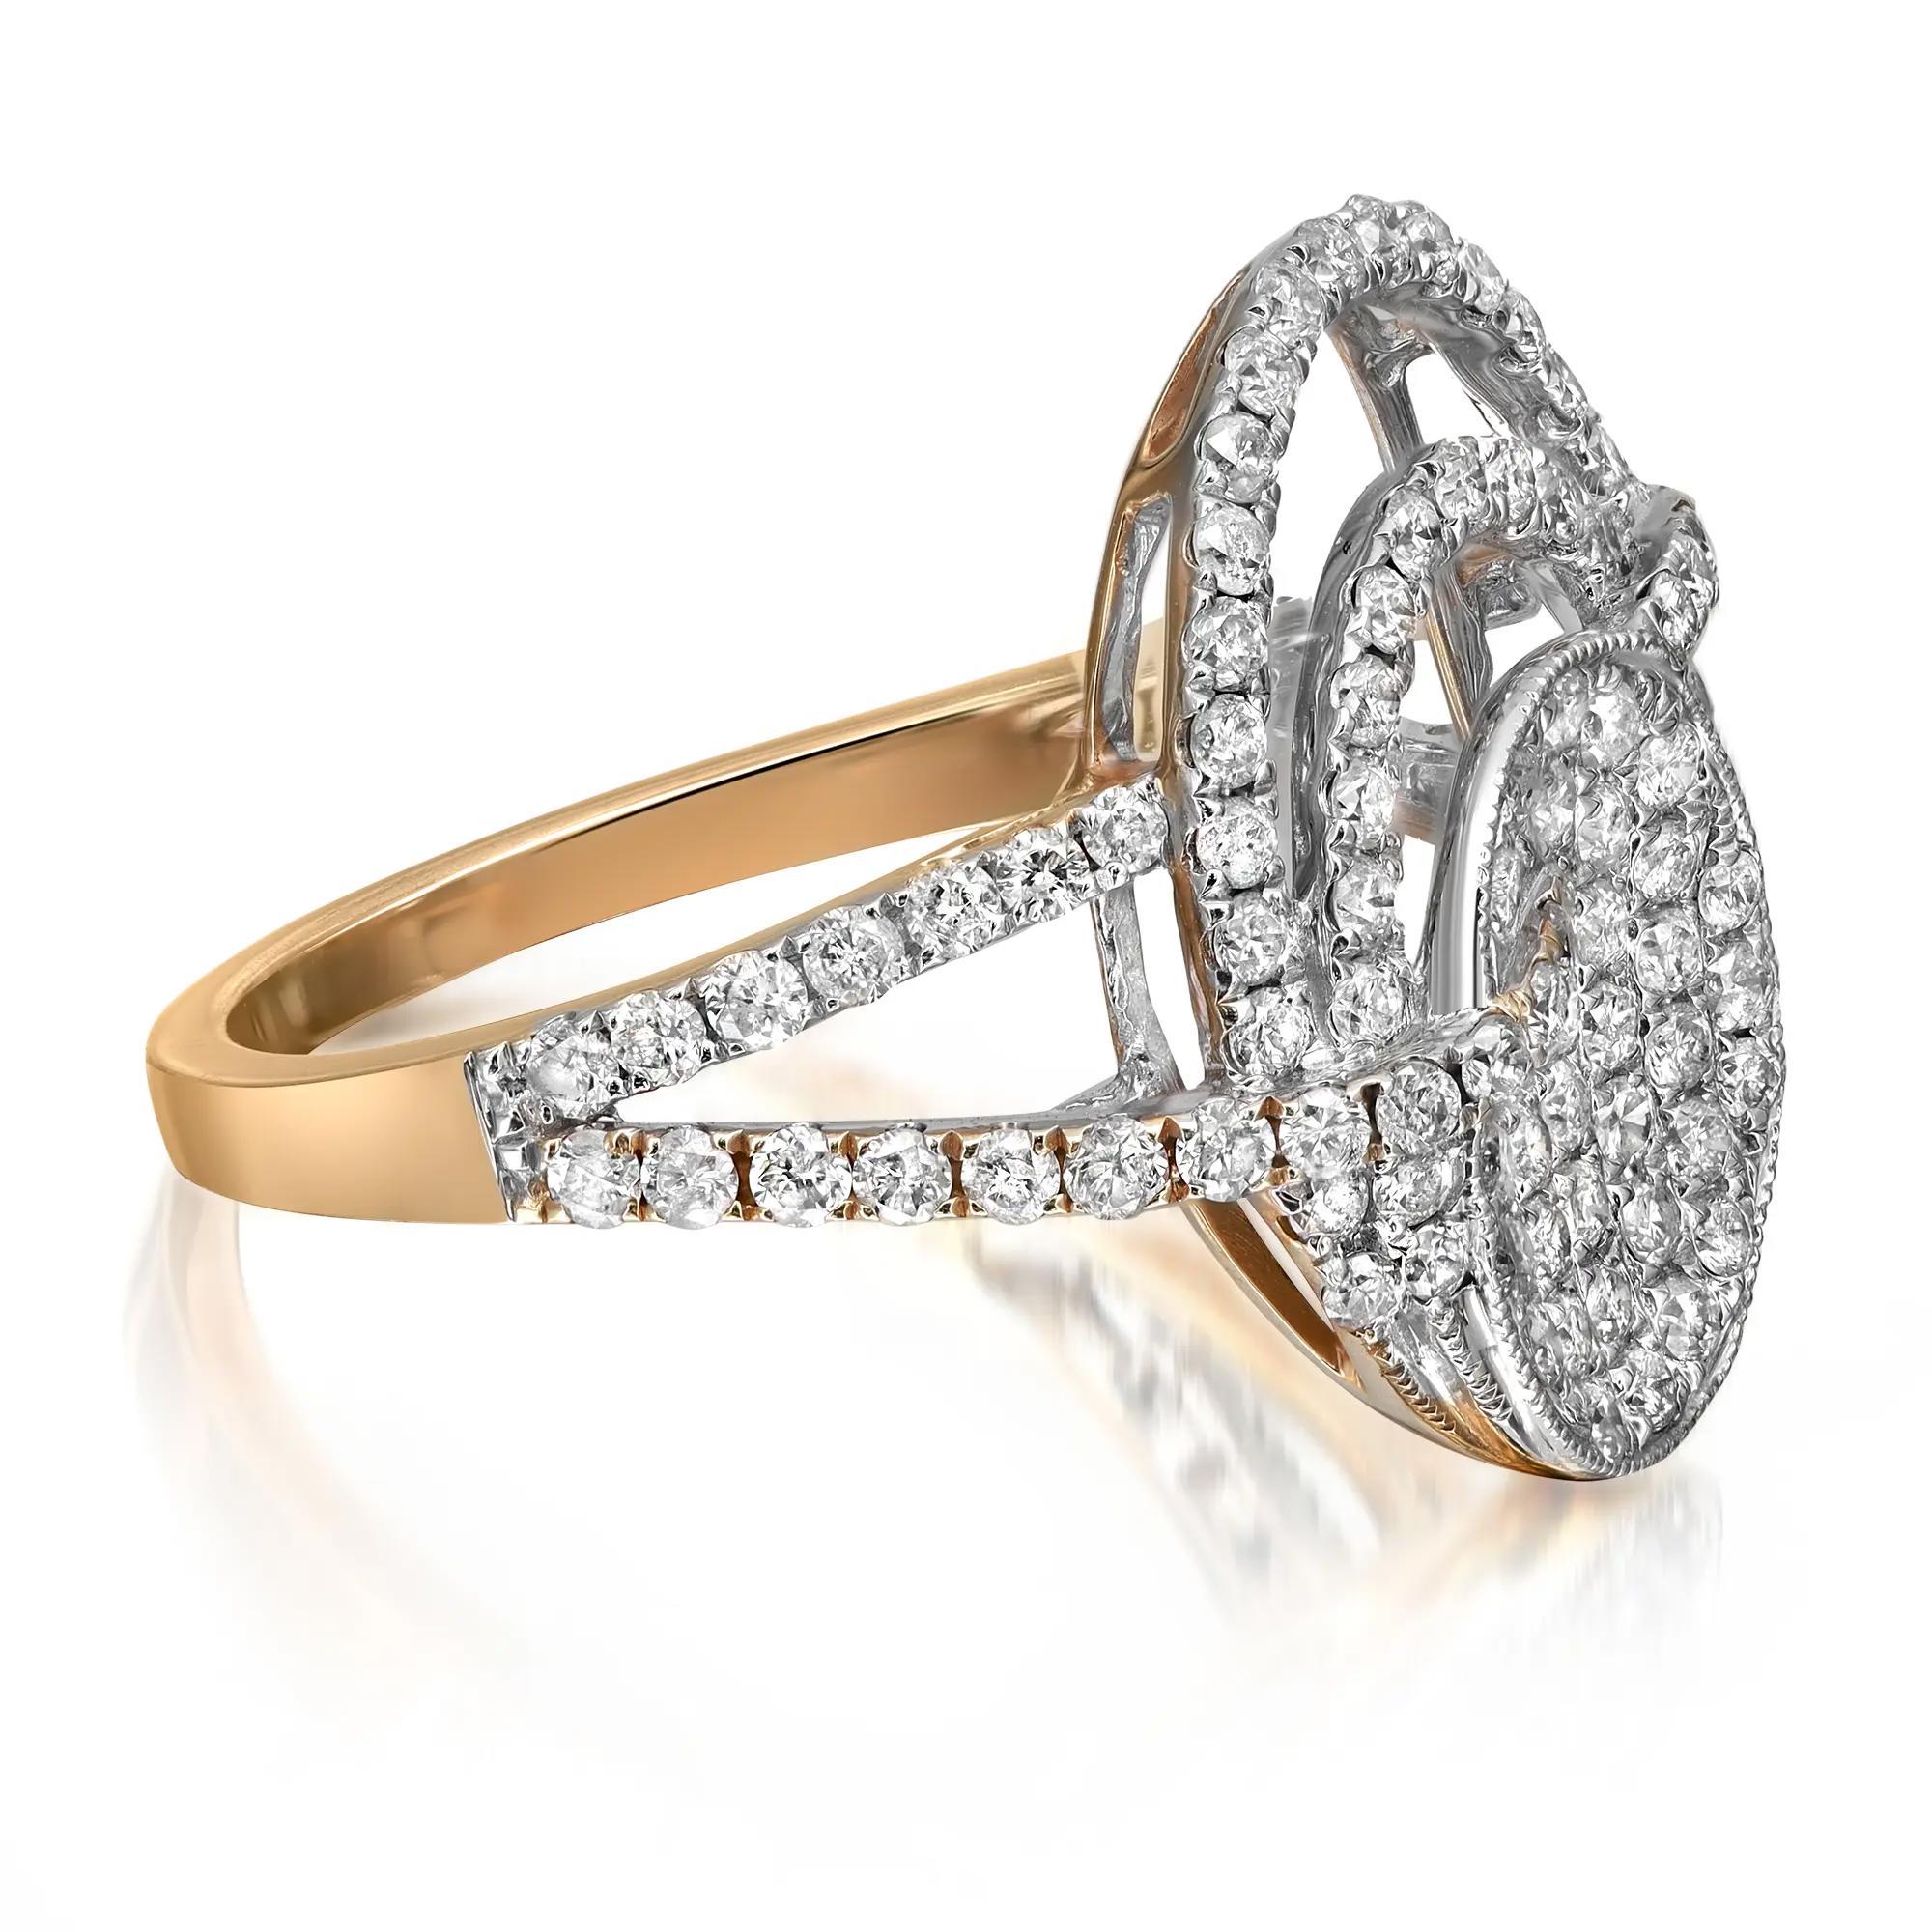 Presenting a luxury and bold natural diamond ring crafted in 14k yellow gold. This fancy ring is highlighted with 1.03 carats of dazzling pave set white round cut diamonds with I color and SI1 clarity. The ring size is 7.75. Total weight: 3.86